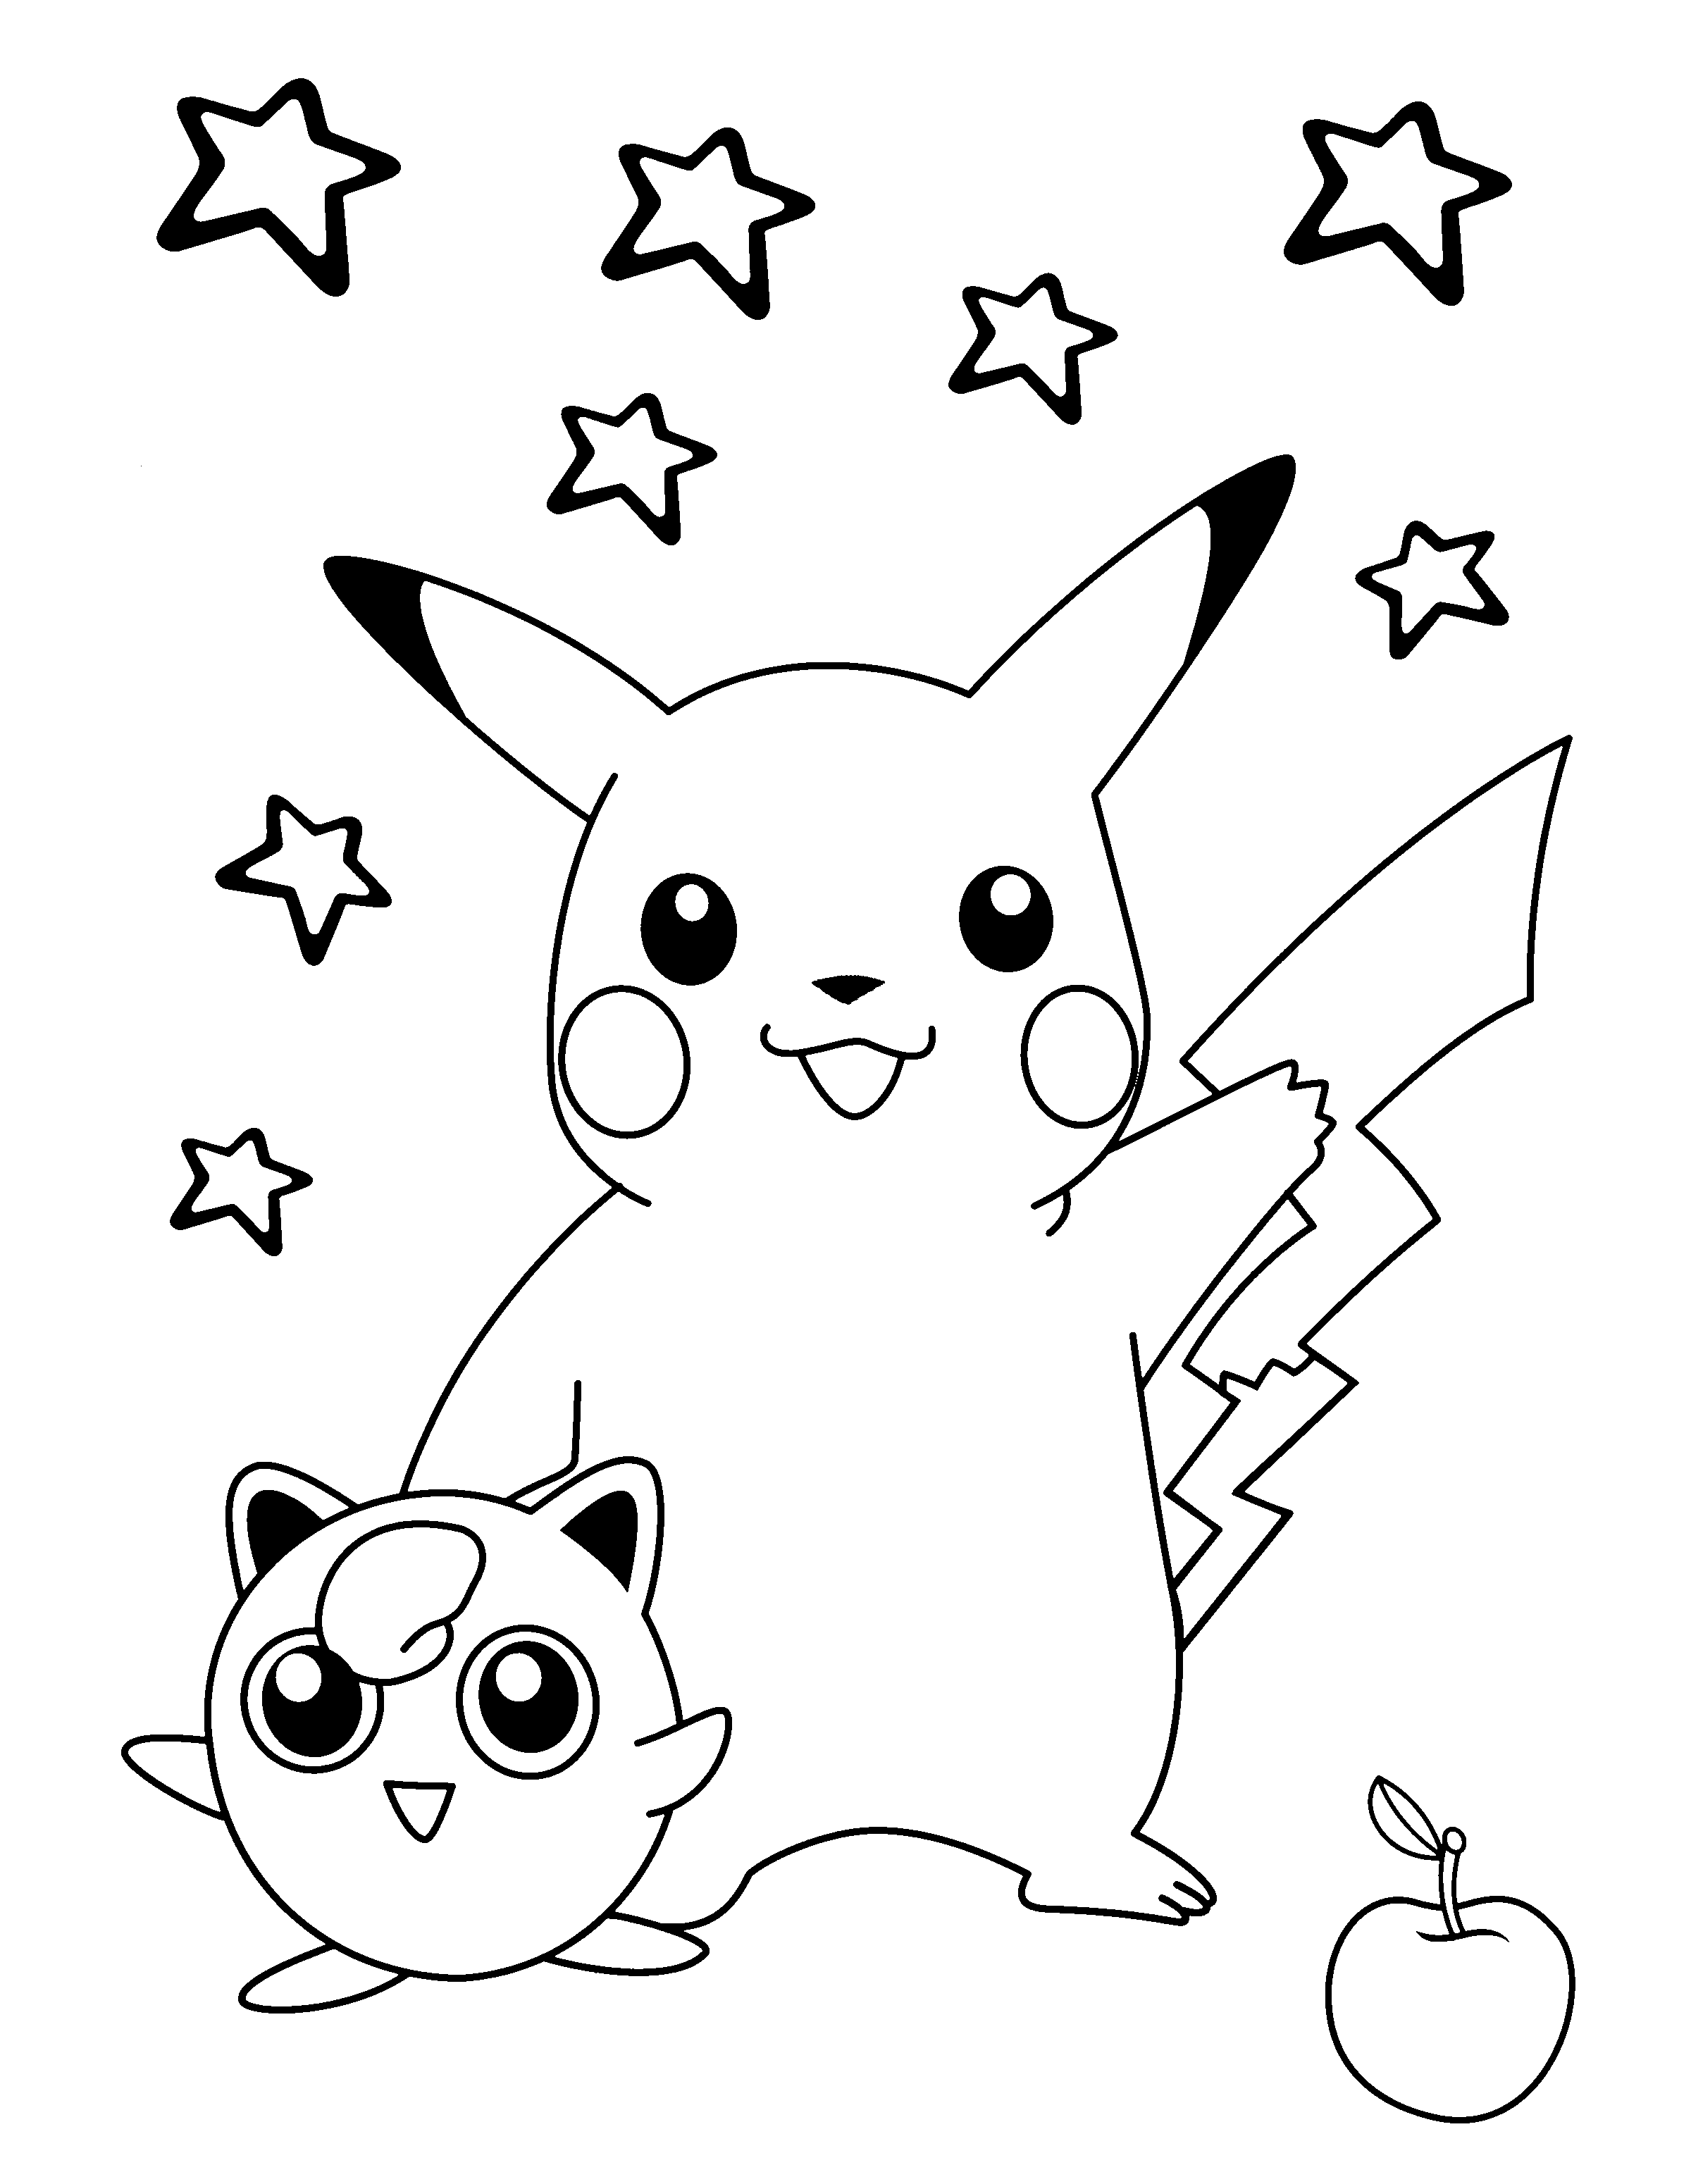  Pokemon Coloring Pages | Coloring pages for kids | coloring pages for boys | #12